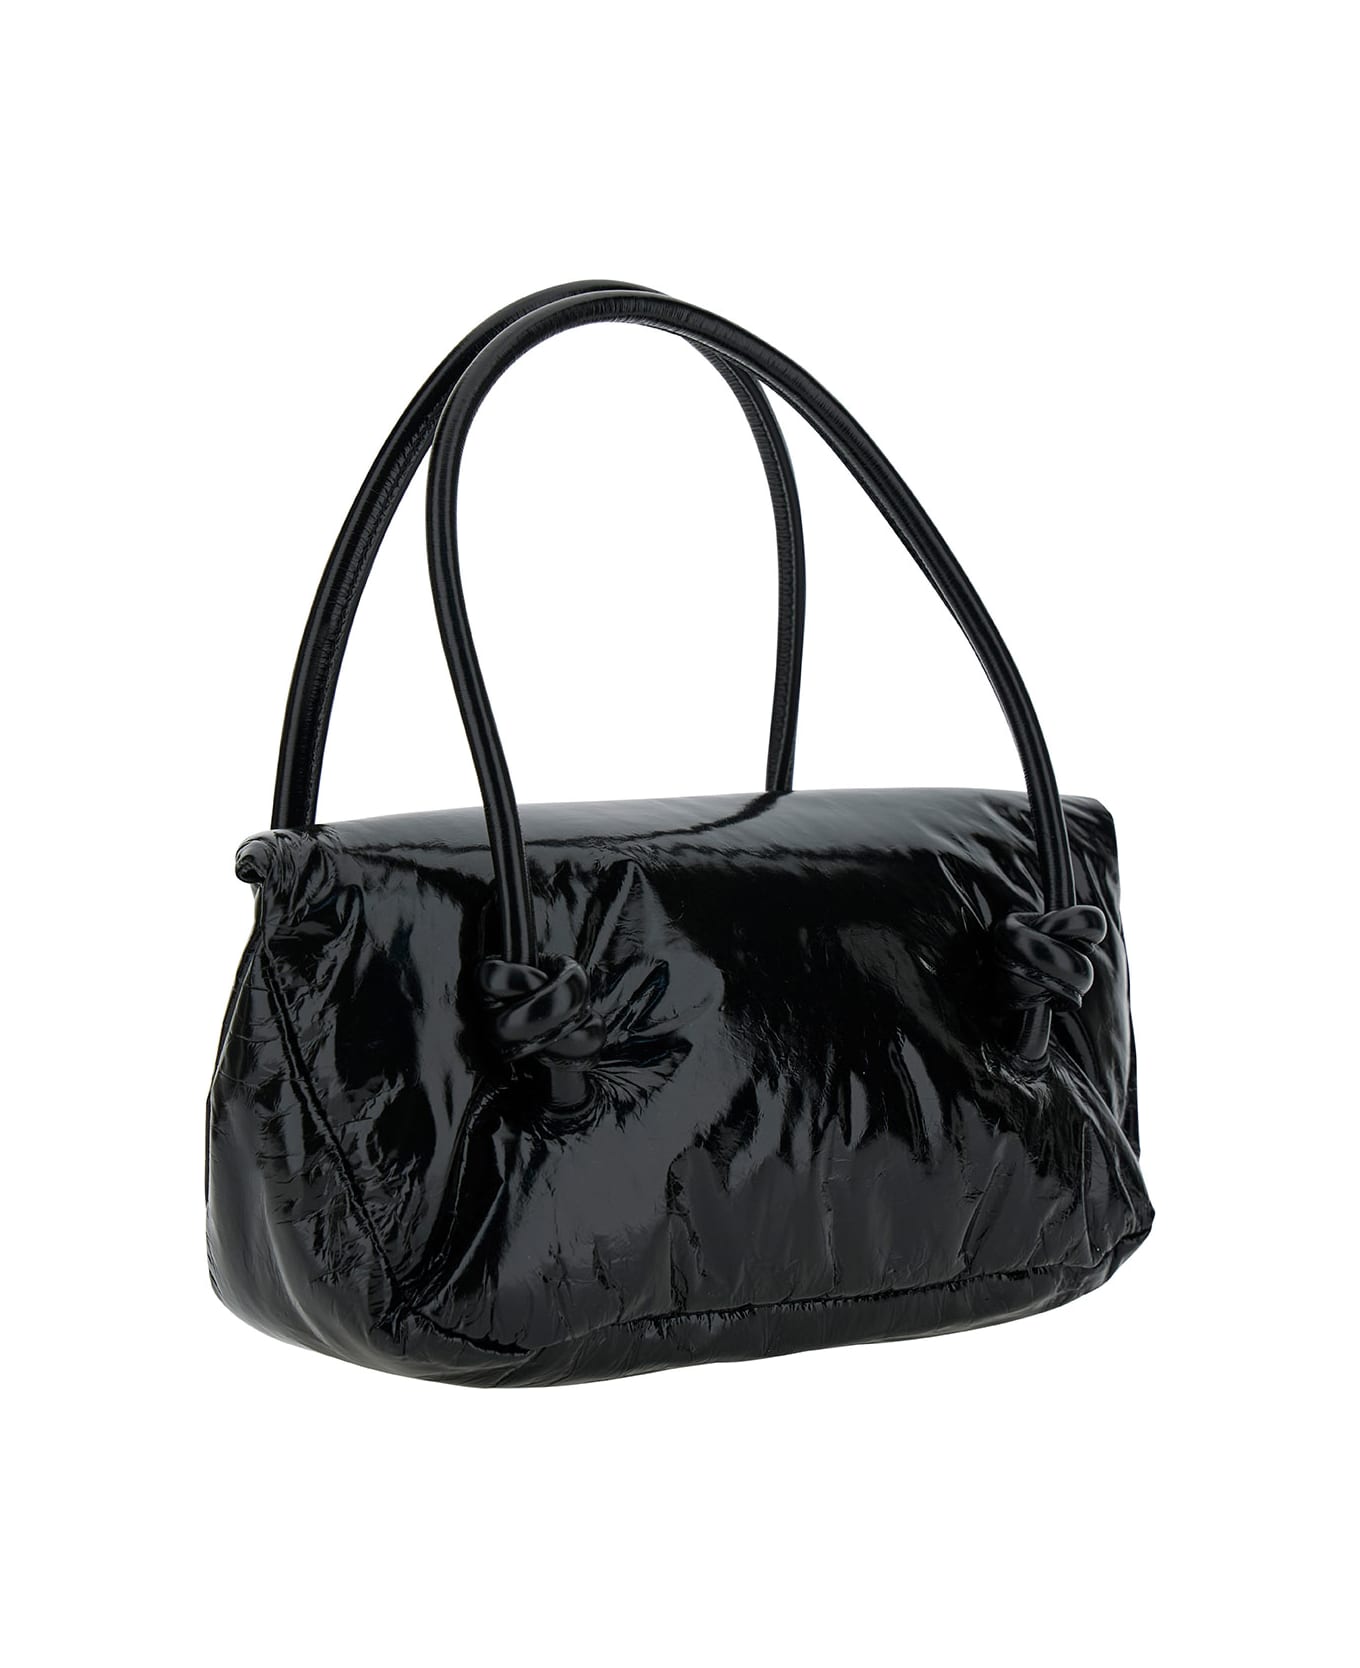 Jil Sander 'knot Small' Black Shoulder Bag With Laminated Logo In Patent Leather Woman - Black